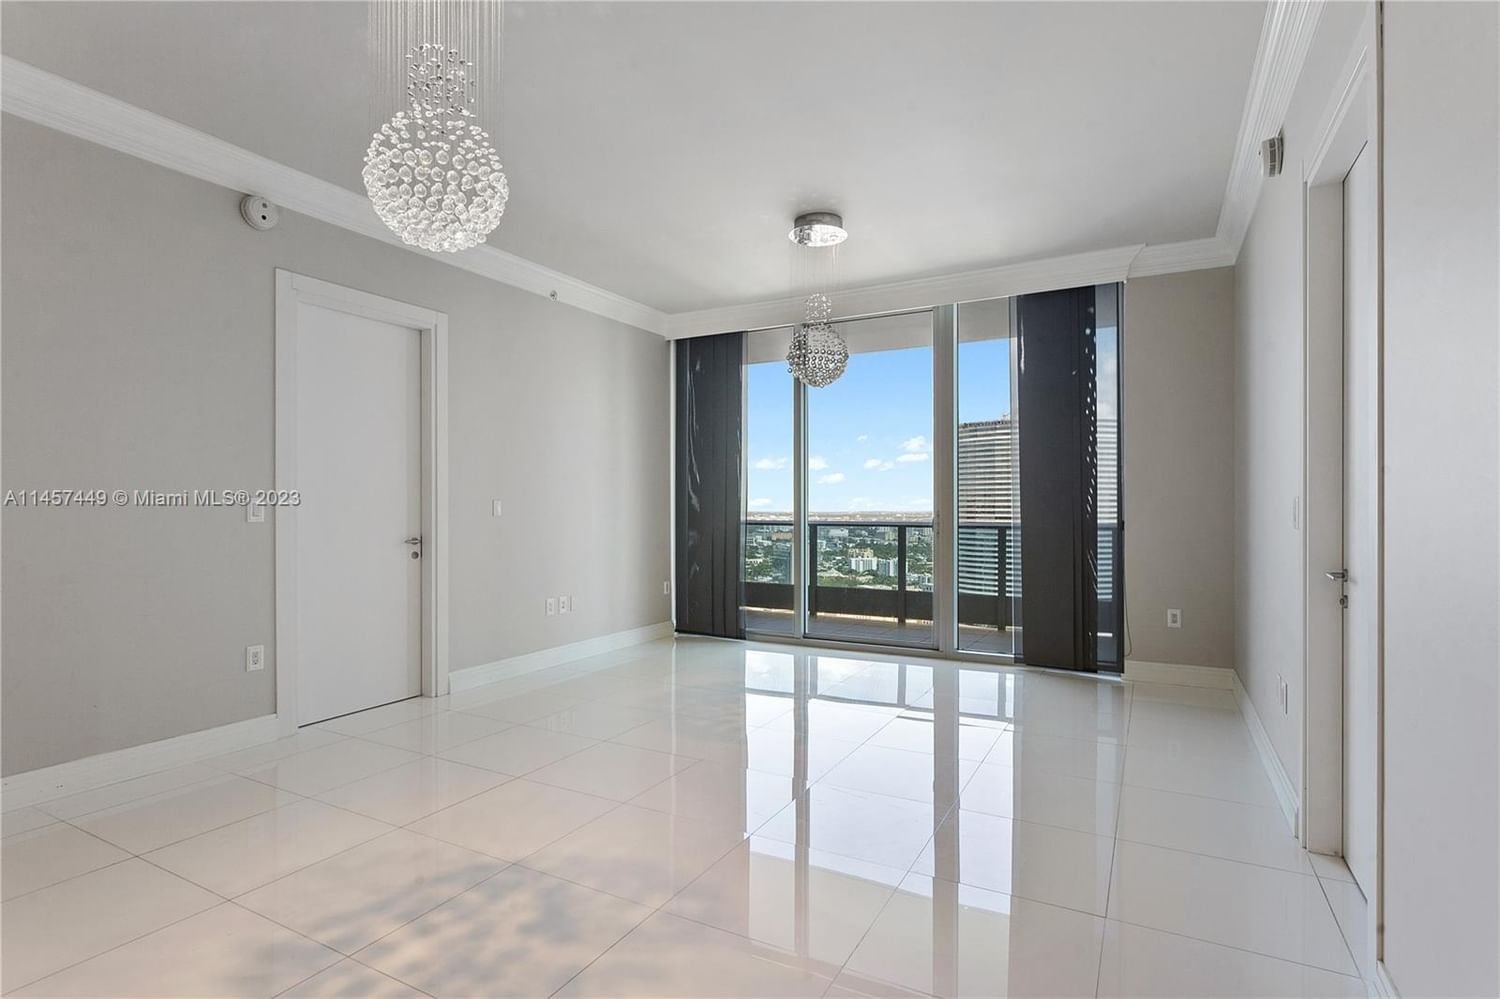 Real estate property located at 200 Biscayne Boulevard Way #5009, Miami-Dade County, Miami, FL